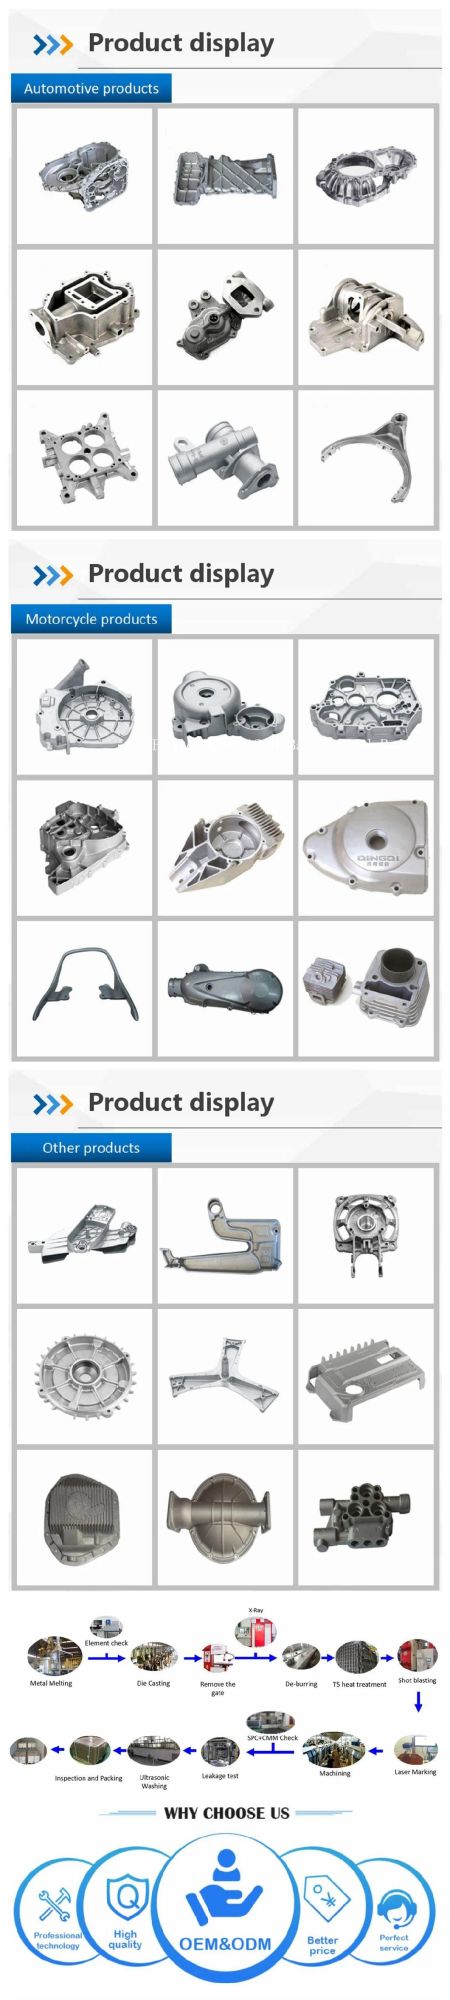 OEM High Quality Die Casting Mold Professional Die Casting Mold Manufacturing Processing Die Casting Tool